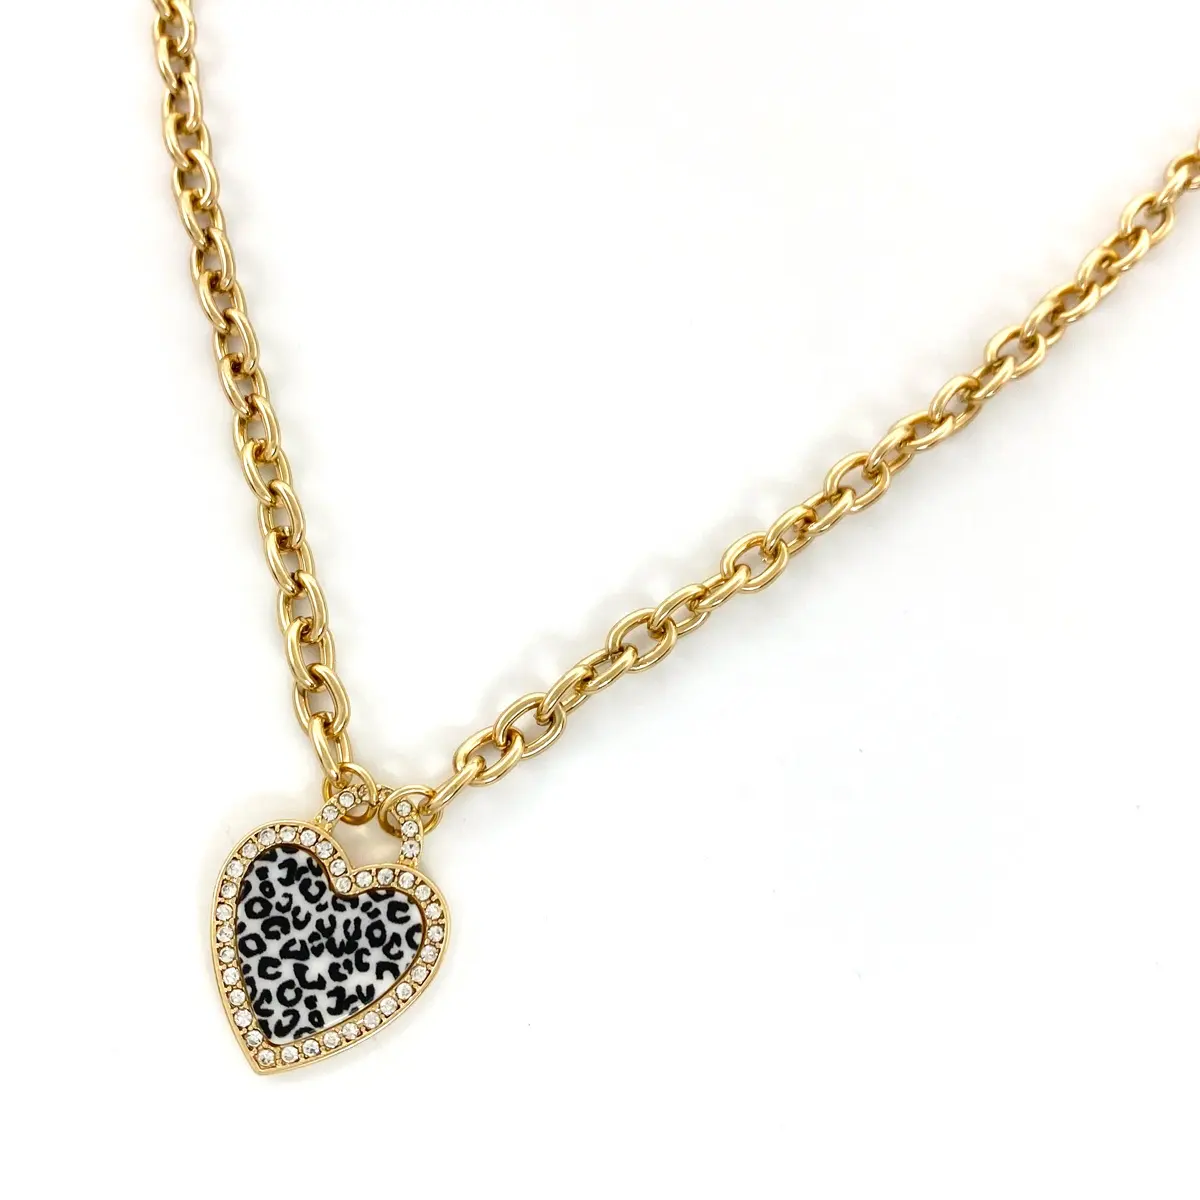 Trendy Vintage Gold Plated Black Leopard Print Heart Crystal Rhinestone Cuba Chain Pendant Necklace for Women